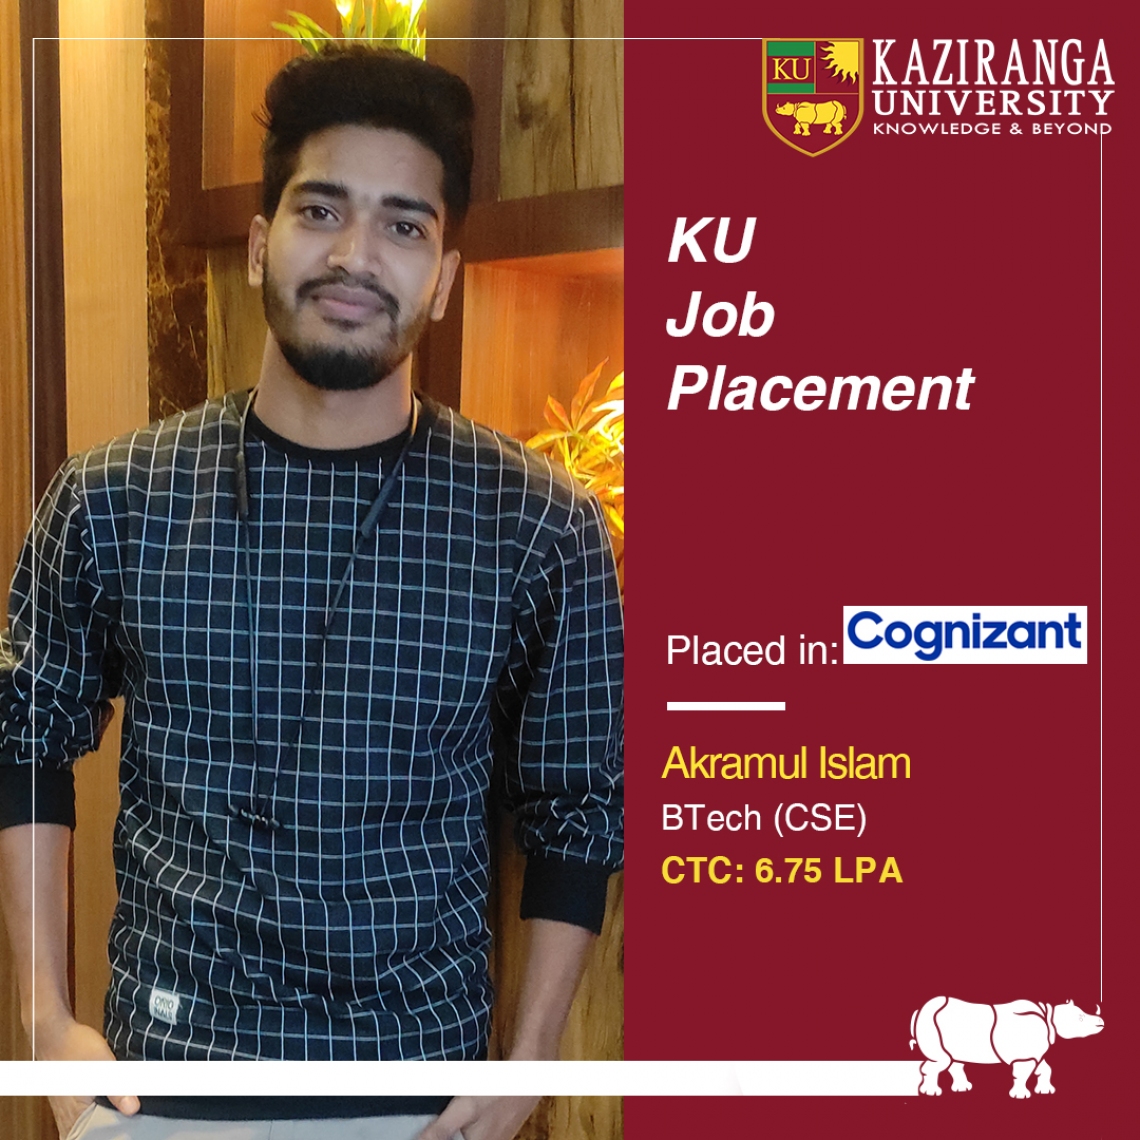 Congratulations, Akramul Islam, on getting placed at M/s Cognizant Technology Solutions Ltd